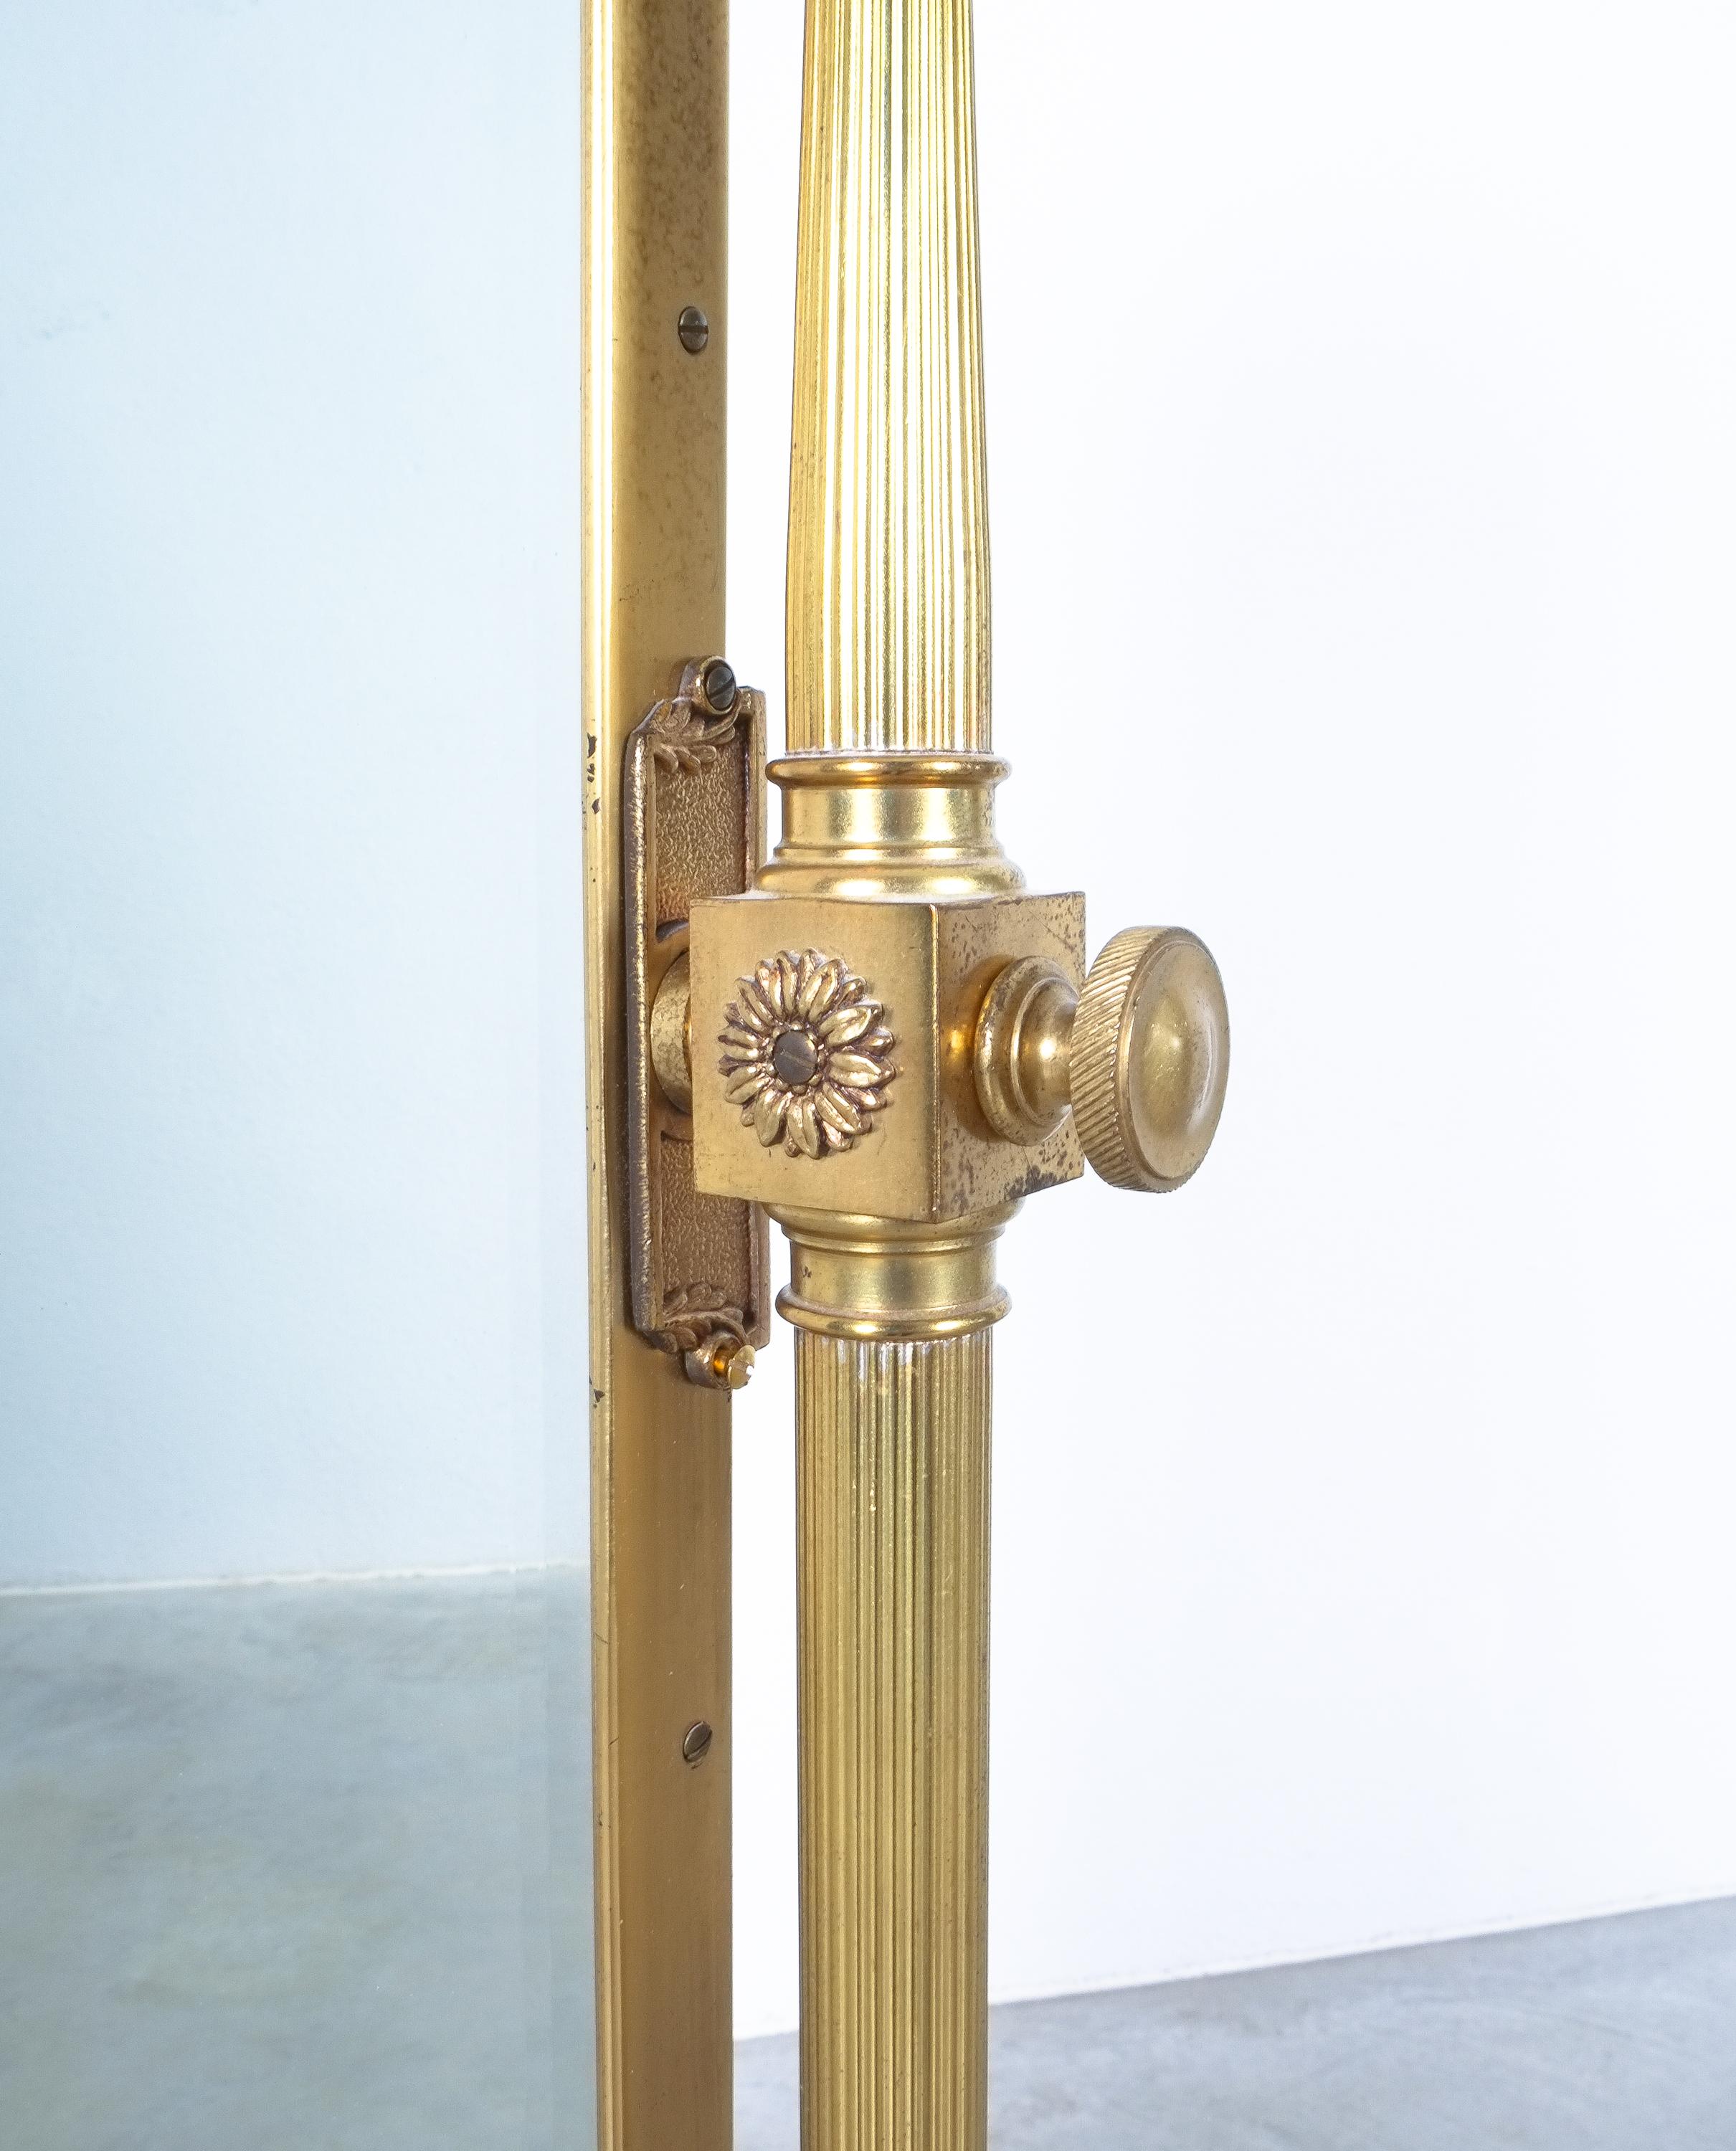 Neoclassical Revival Neoclassical Floor Standing Cheval Mirror Made from Brass, France, 1970